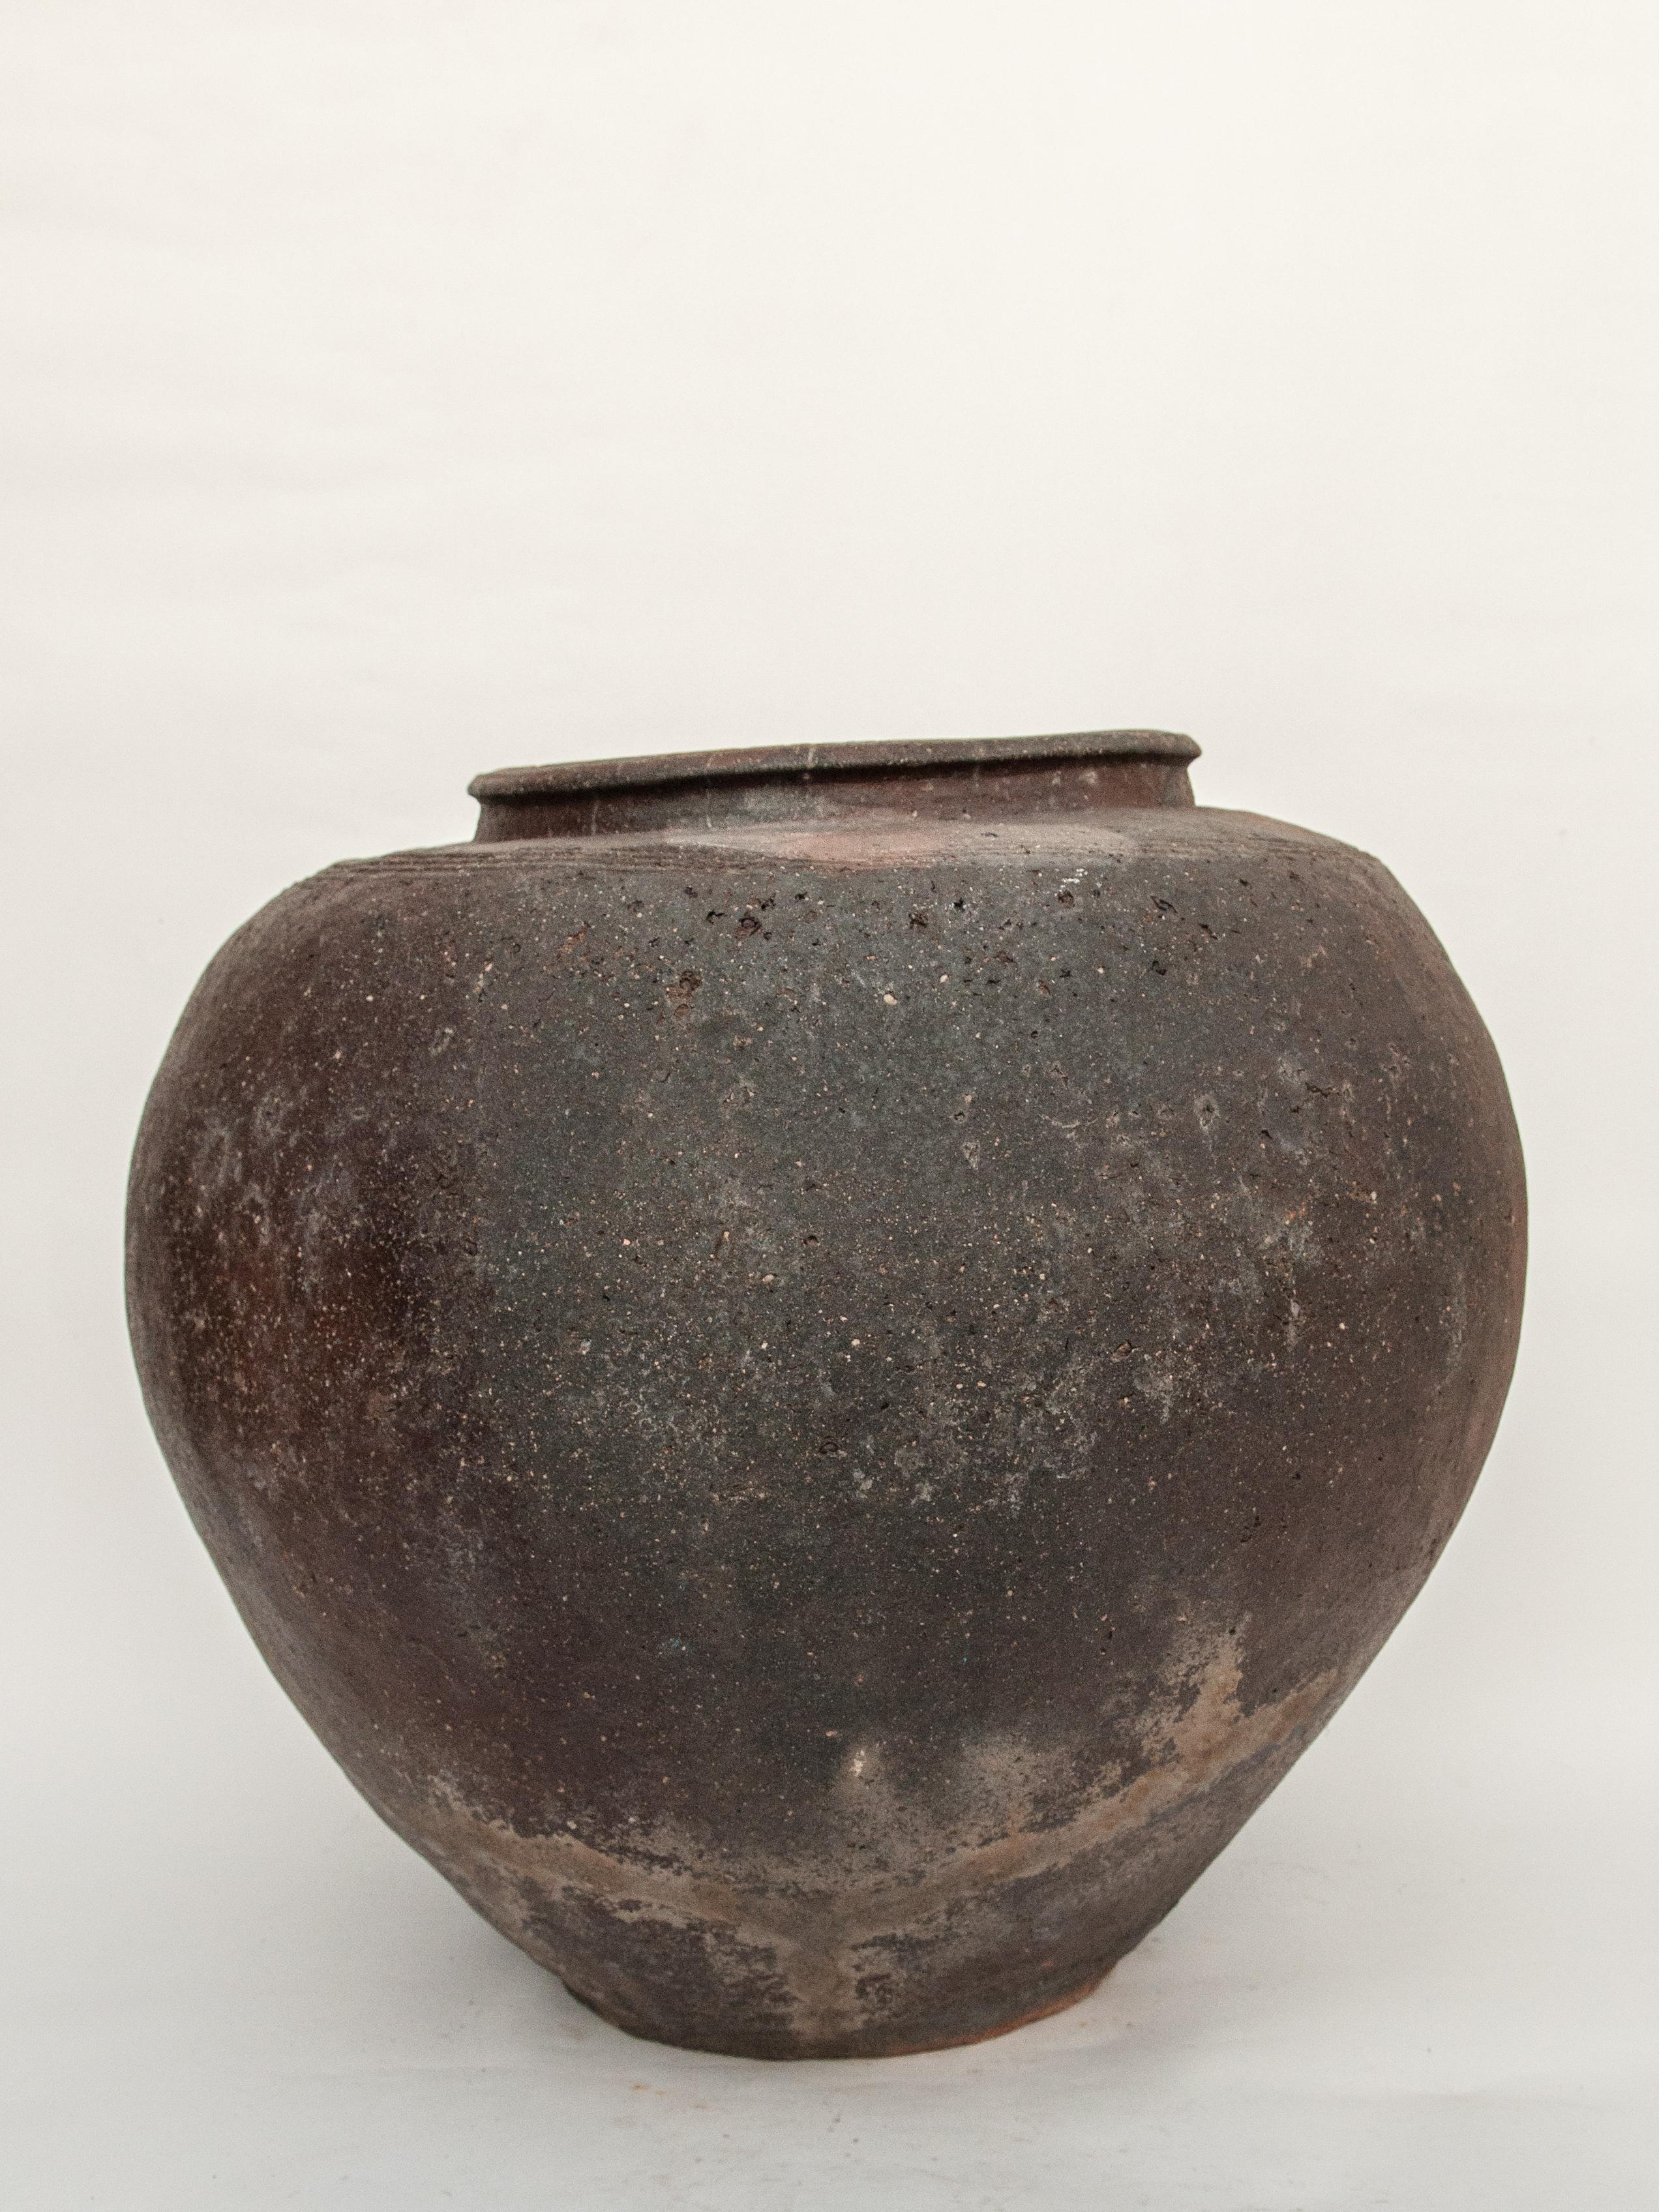 Rustic Large Vintage Storage or Water Jar from Borneo, Unglazed, Mid-20th Century